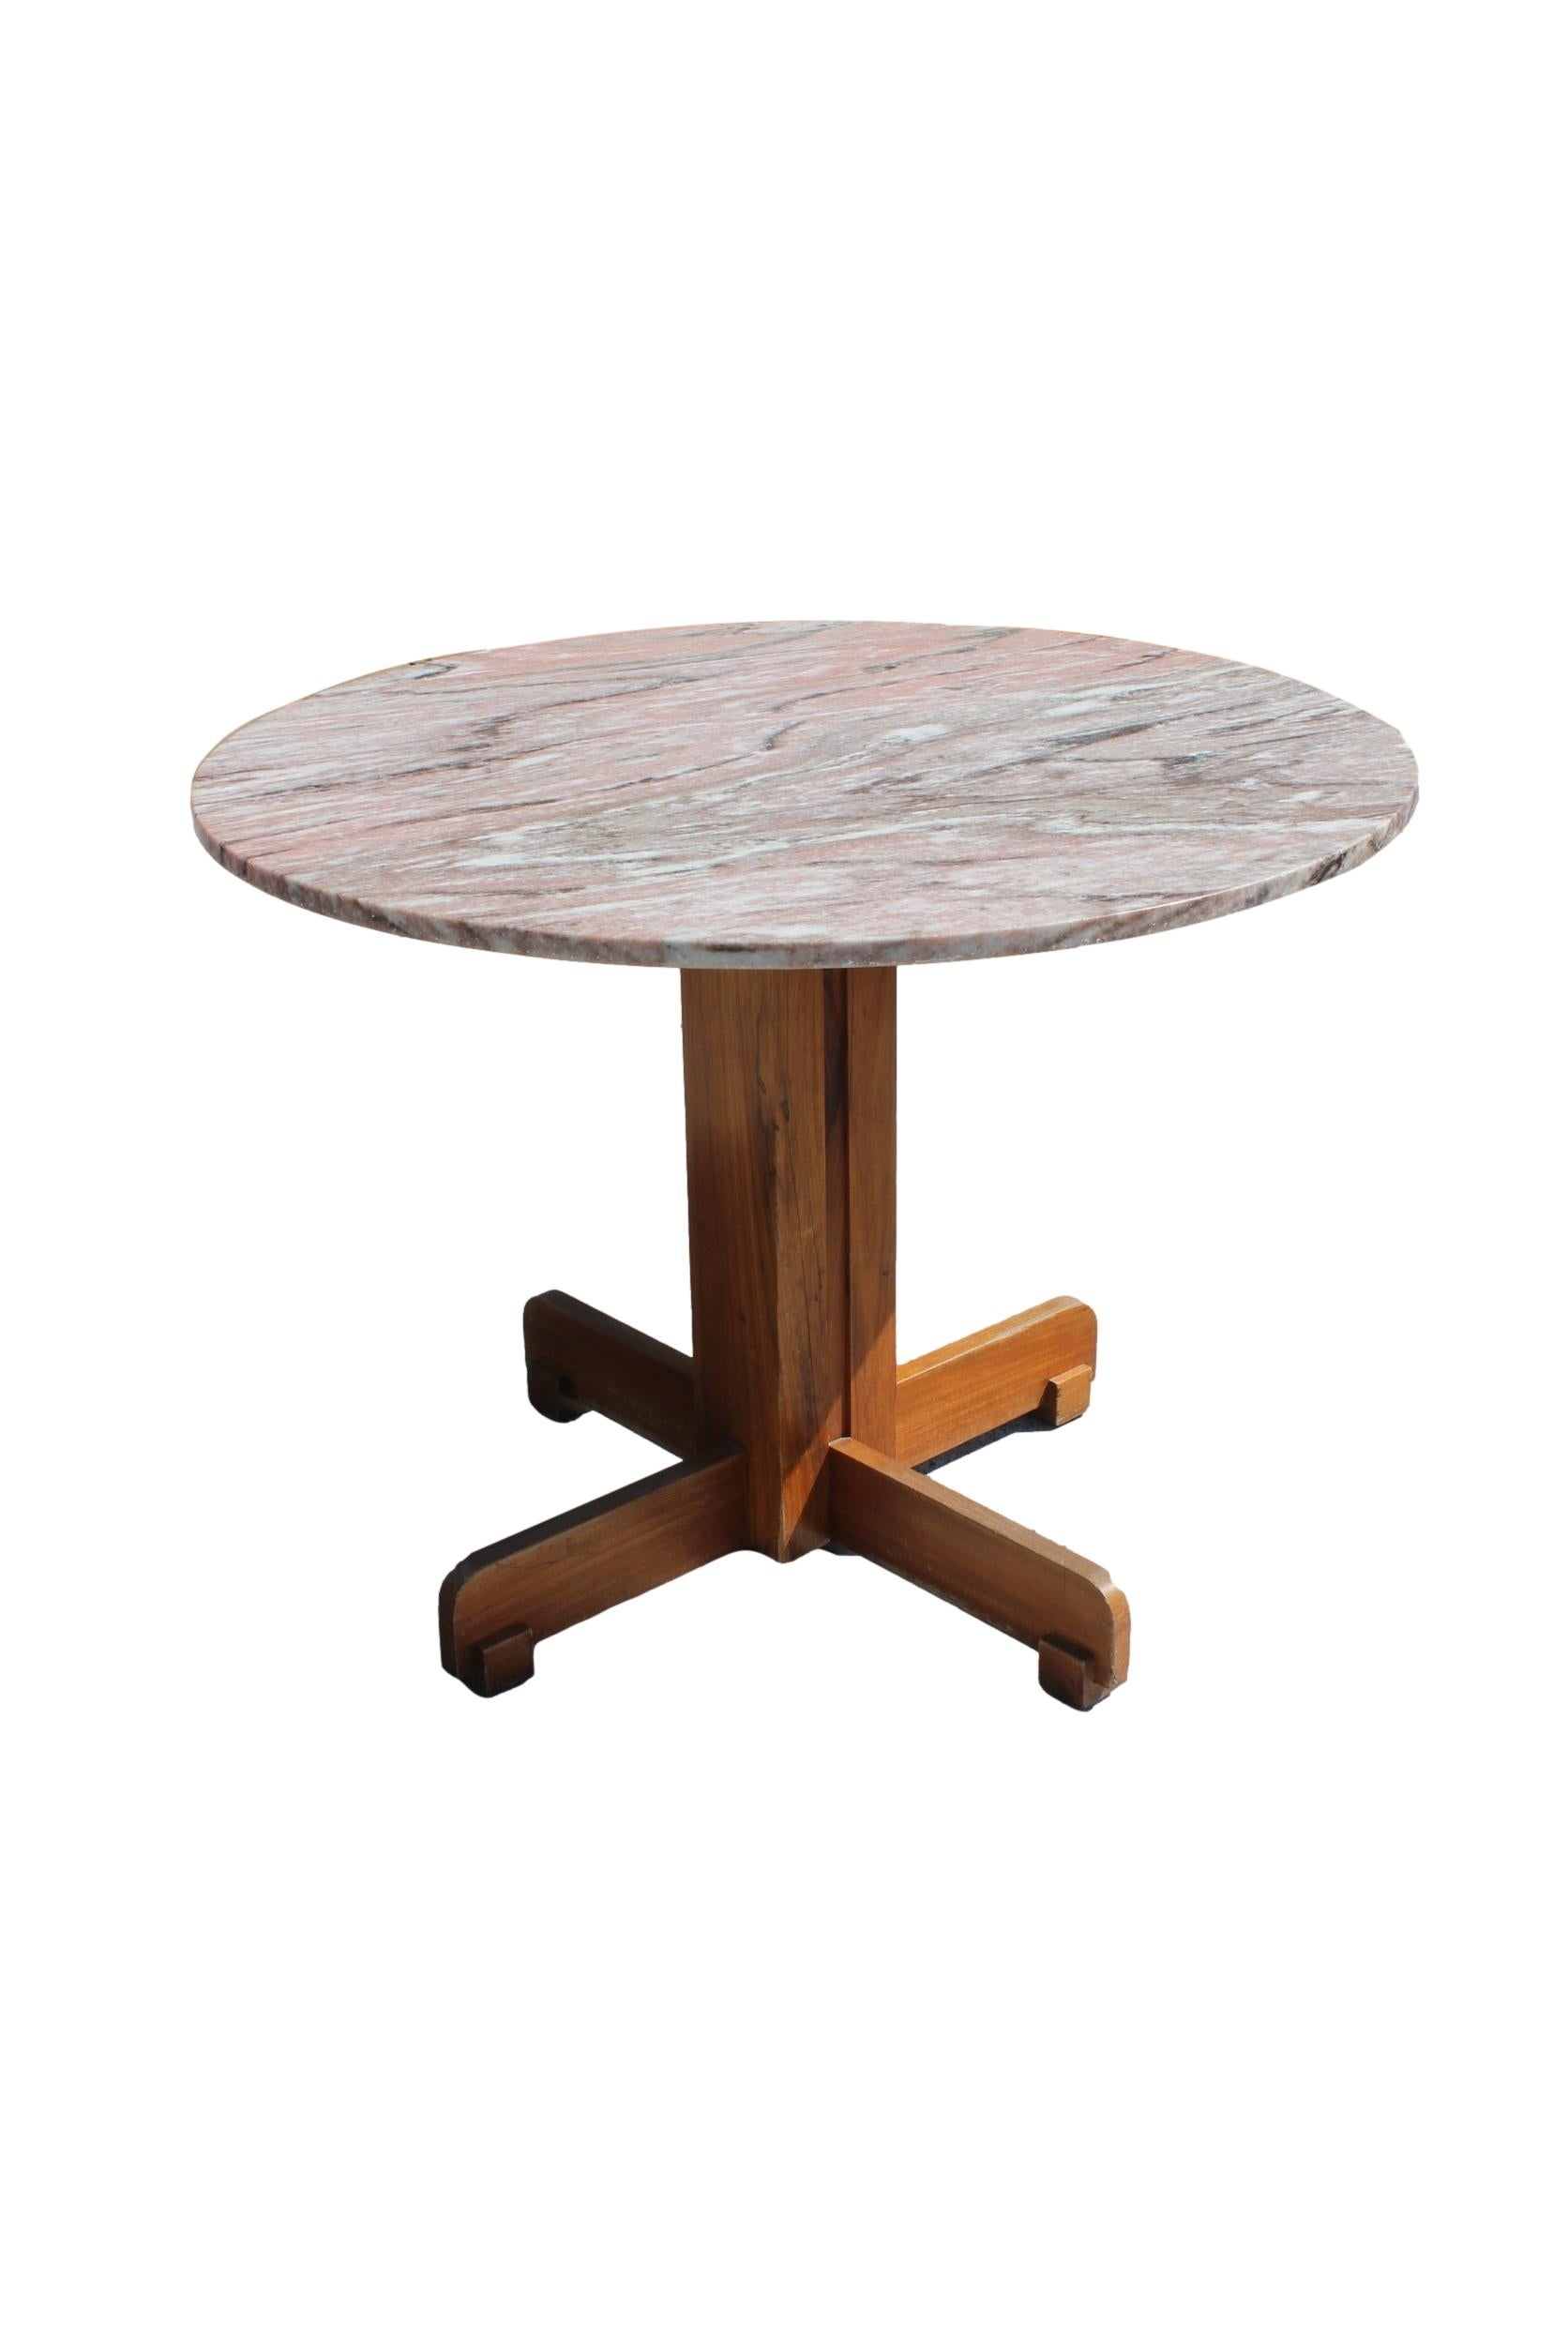 Brazilian Sergio Rodrigues Alex Dinning Table For Sale